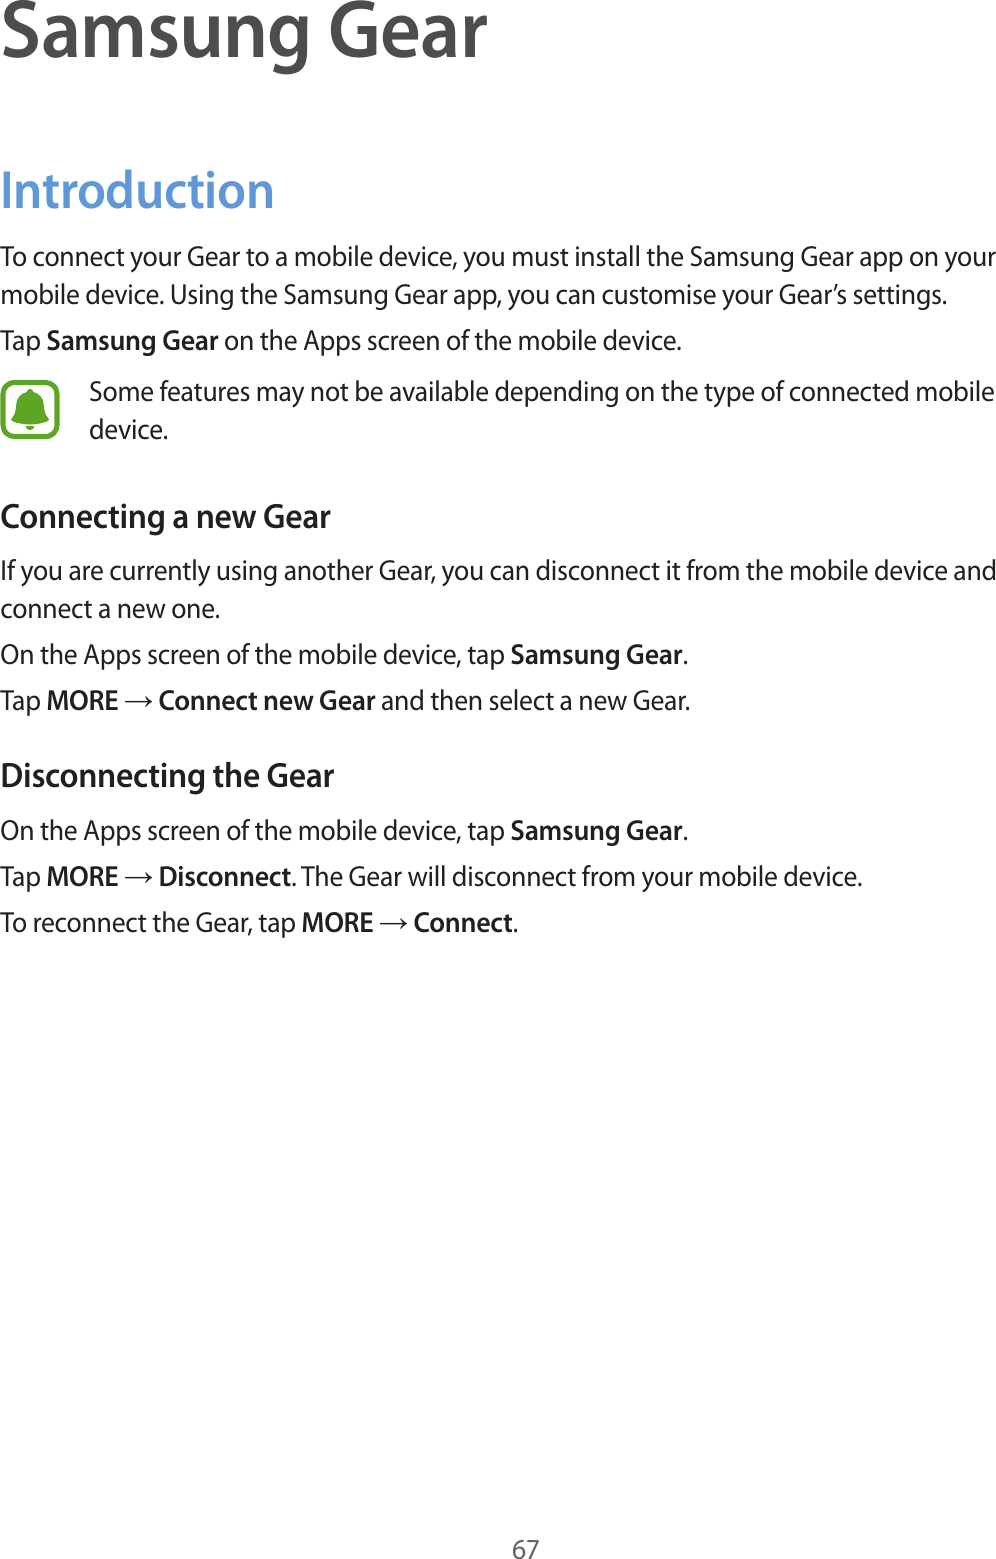 67Samsung GearIntroductionTo connect your Gear to a mobile device, you must install the Samsung Gear app on your mobile device. Using the Samsung Gear app, you can customise your Gear’s settings.Tap Samsung Gear on the Apps screen of the mobile device.Some features may not be available depending on the type of connected mobile device.Connecting a new GearIf you are currently using another Gear, you can disconnect it from the mobile device and connect a new one.On the Apps screen of the mobile device, tap Samsung Gear.Tap MORE → Connect new Gear and then select a new Gear.Disconnecting the GearOn the Apps screen of the mobile device, tap Samsung Gear.Tap MORE → Disconnect. The Gear will disconnect from your mobile device.To reconnect the Gear, tap MORE → Connect.